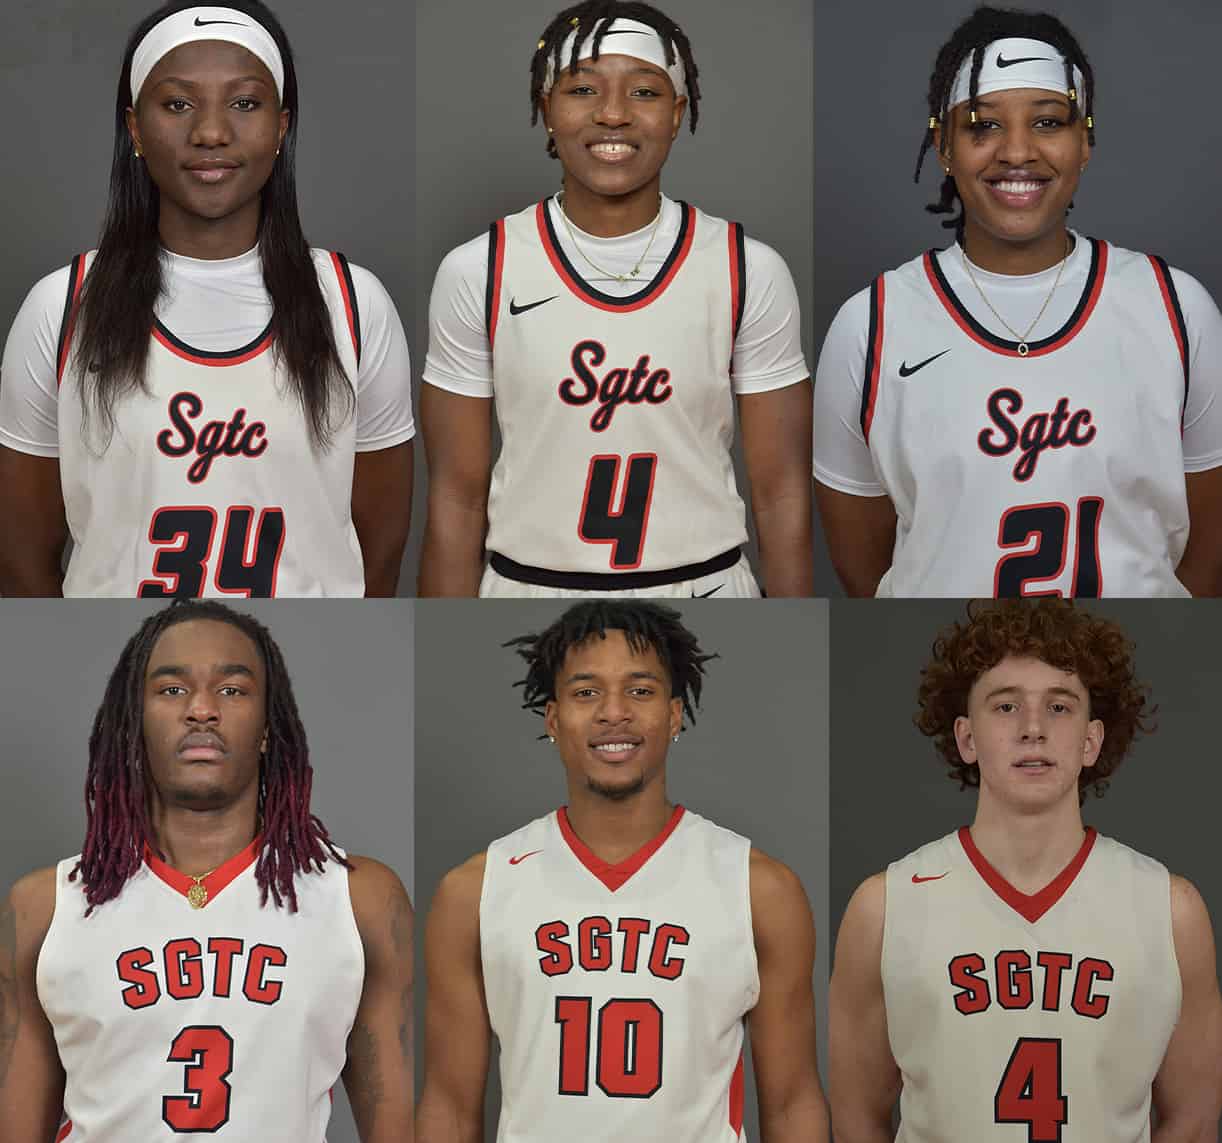 Six South Georgia Technical College basketball players are ranked nationally for their individual efforts. They include Lady Jets: Femme Sikuzani (34),Hope Butera (21), and Veronica Charles (4). The Jets earning national recognition include the nation’s best rebounder Jalen Reynolds (3), Will Johnson (4), and Marvin McGhee (10).